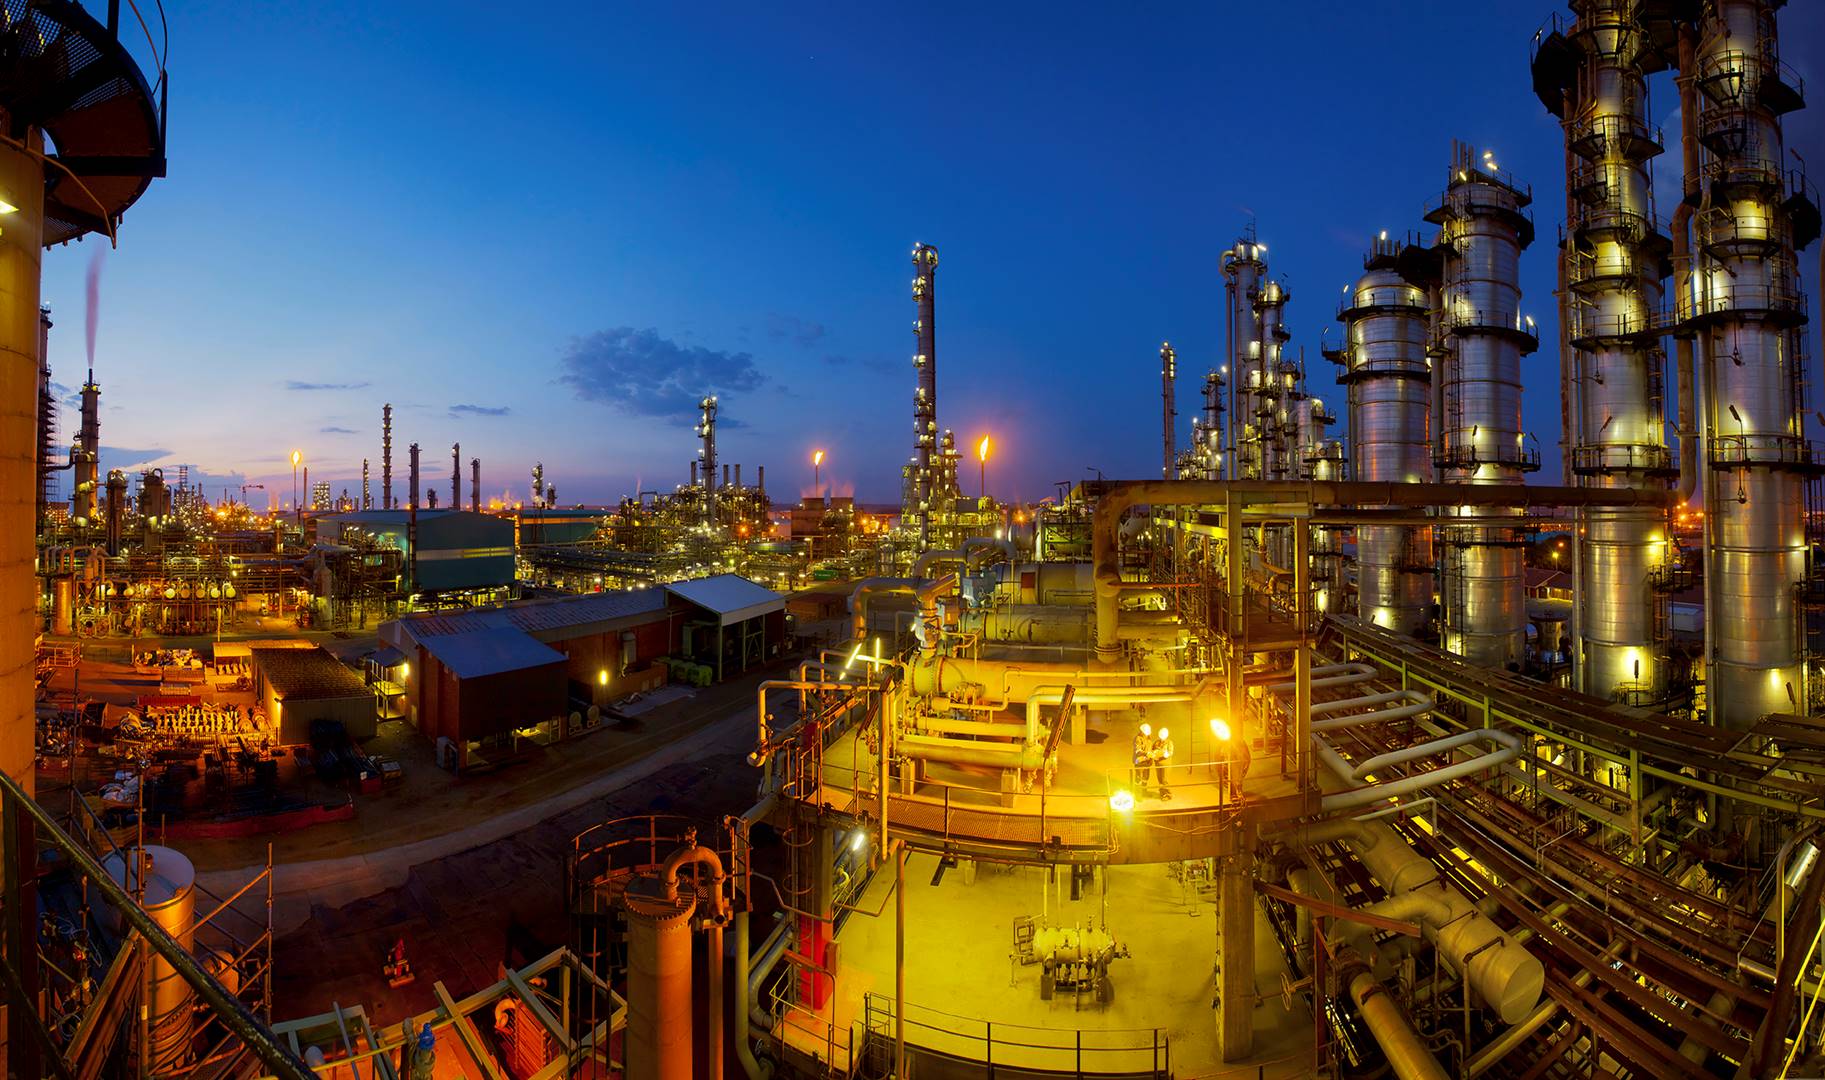 Sasol's Secunda plant is the world's largest single-source emitter of greenhouse gases.